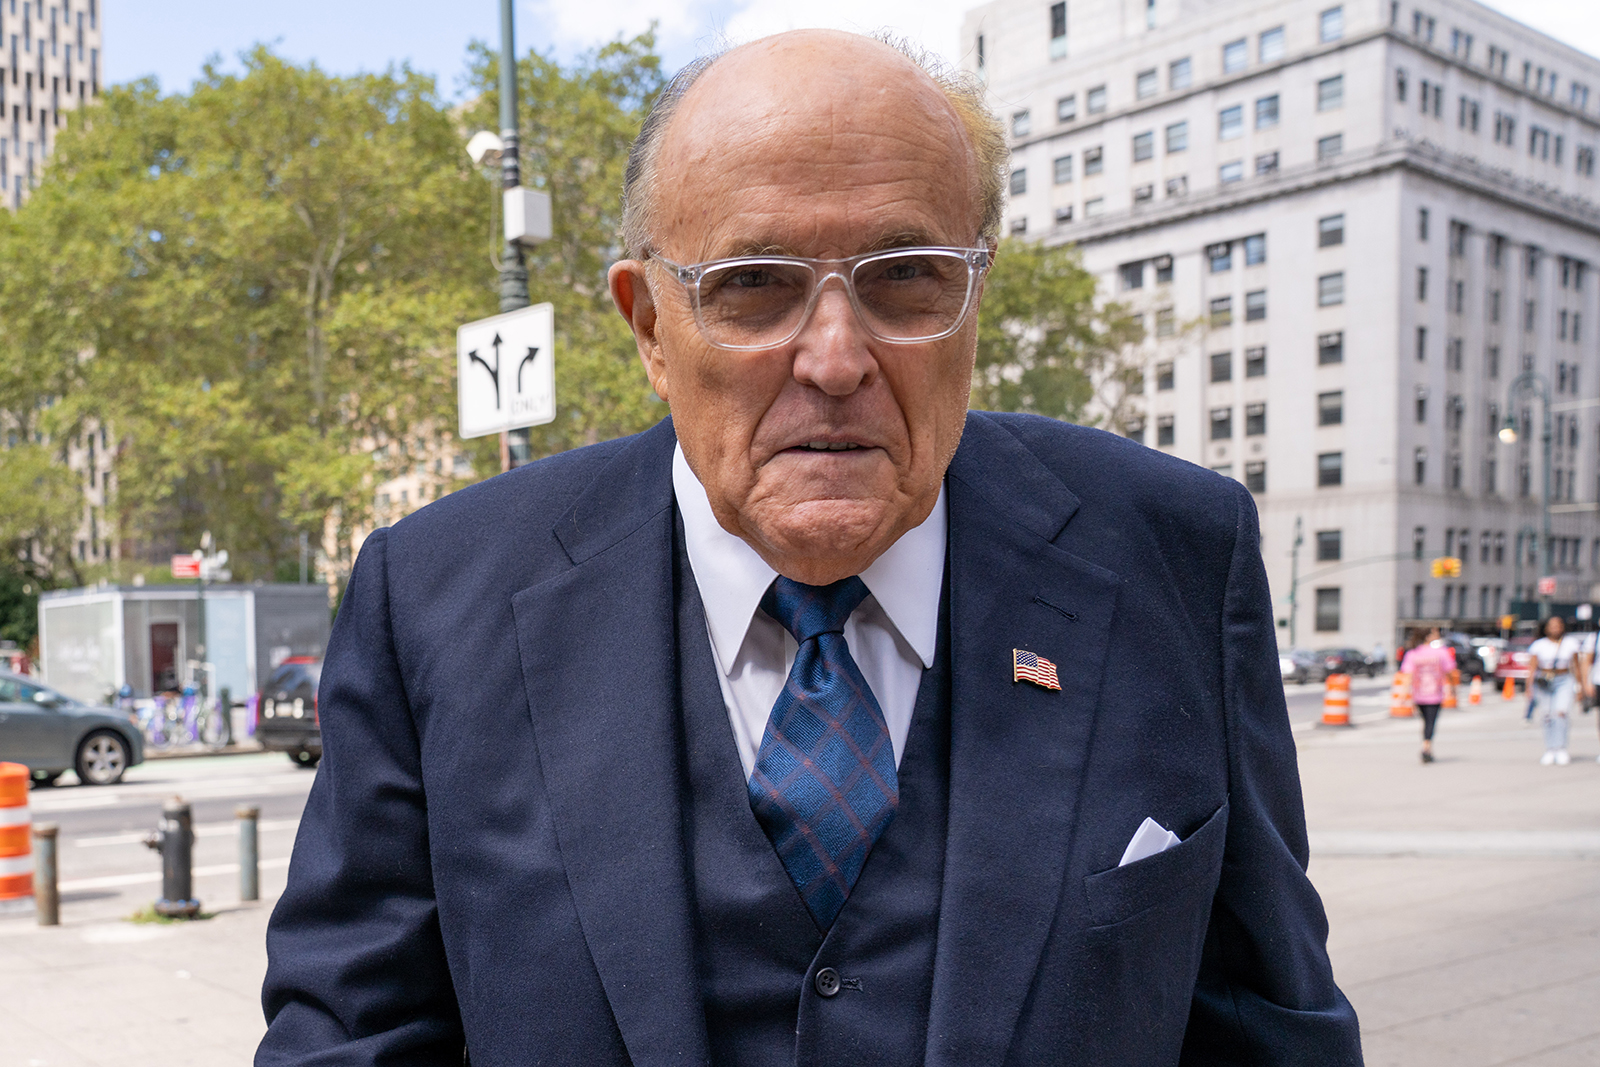 Rudy Giuliani Avoids Jail Time in Fight With Ex-Wife Judith